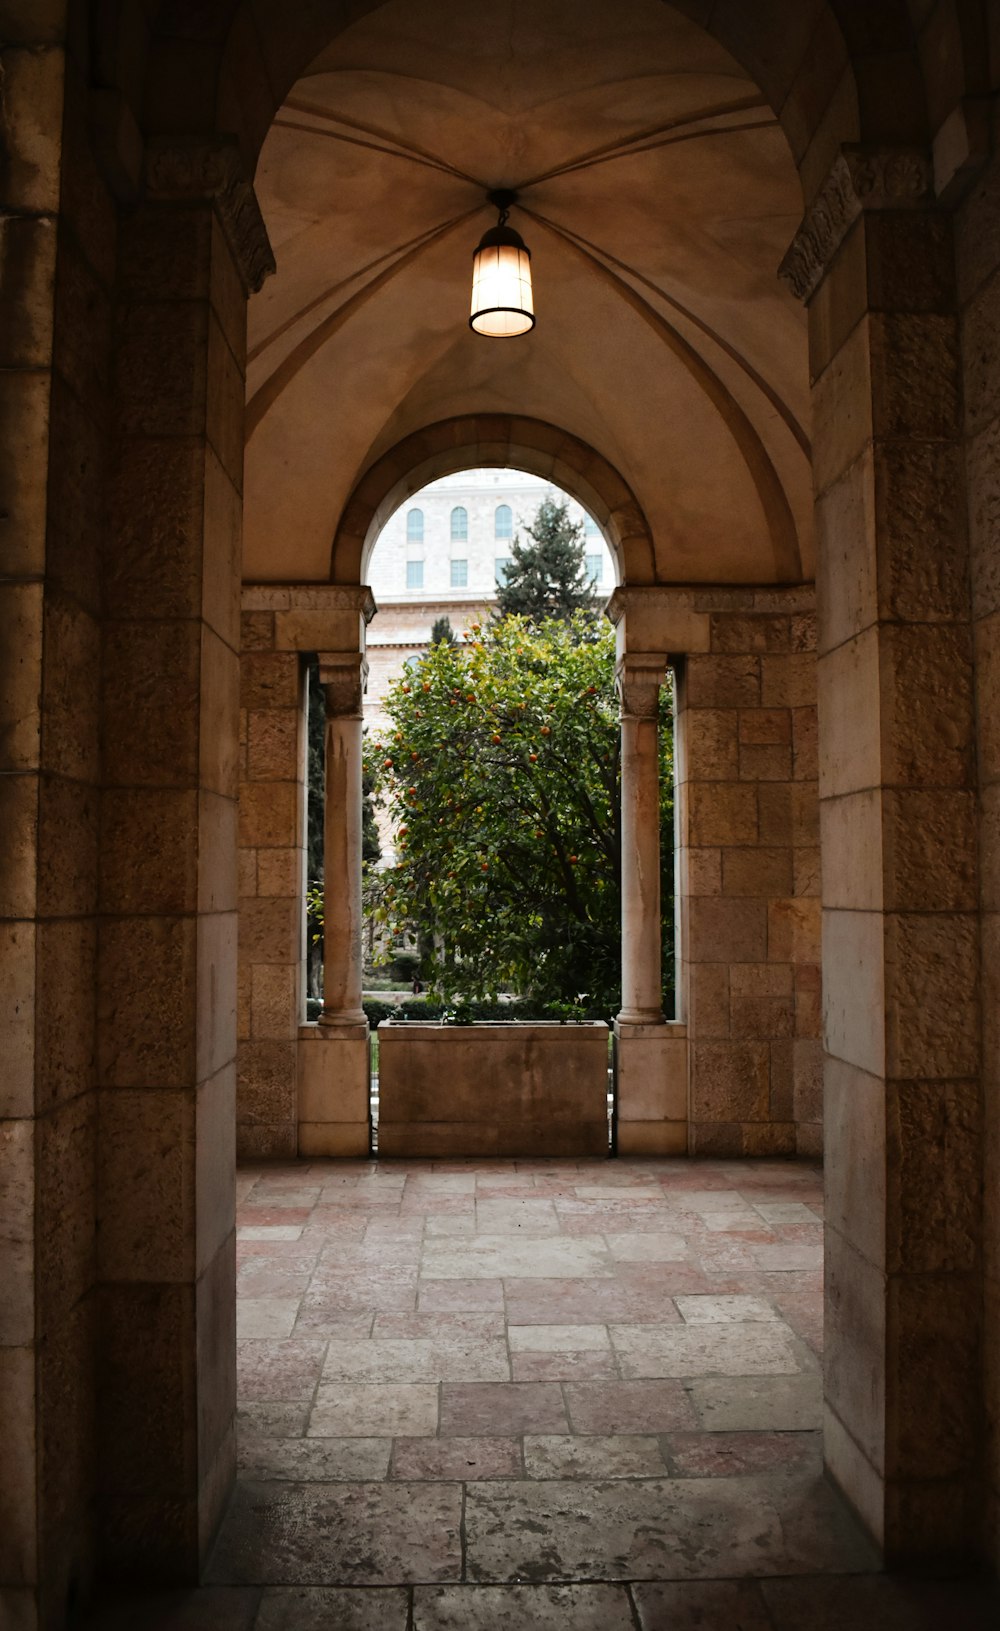 an archway leading into a building with a clock tower in the background